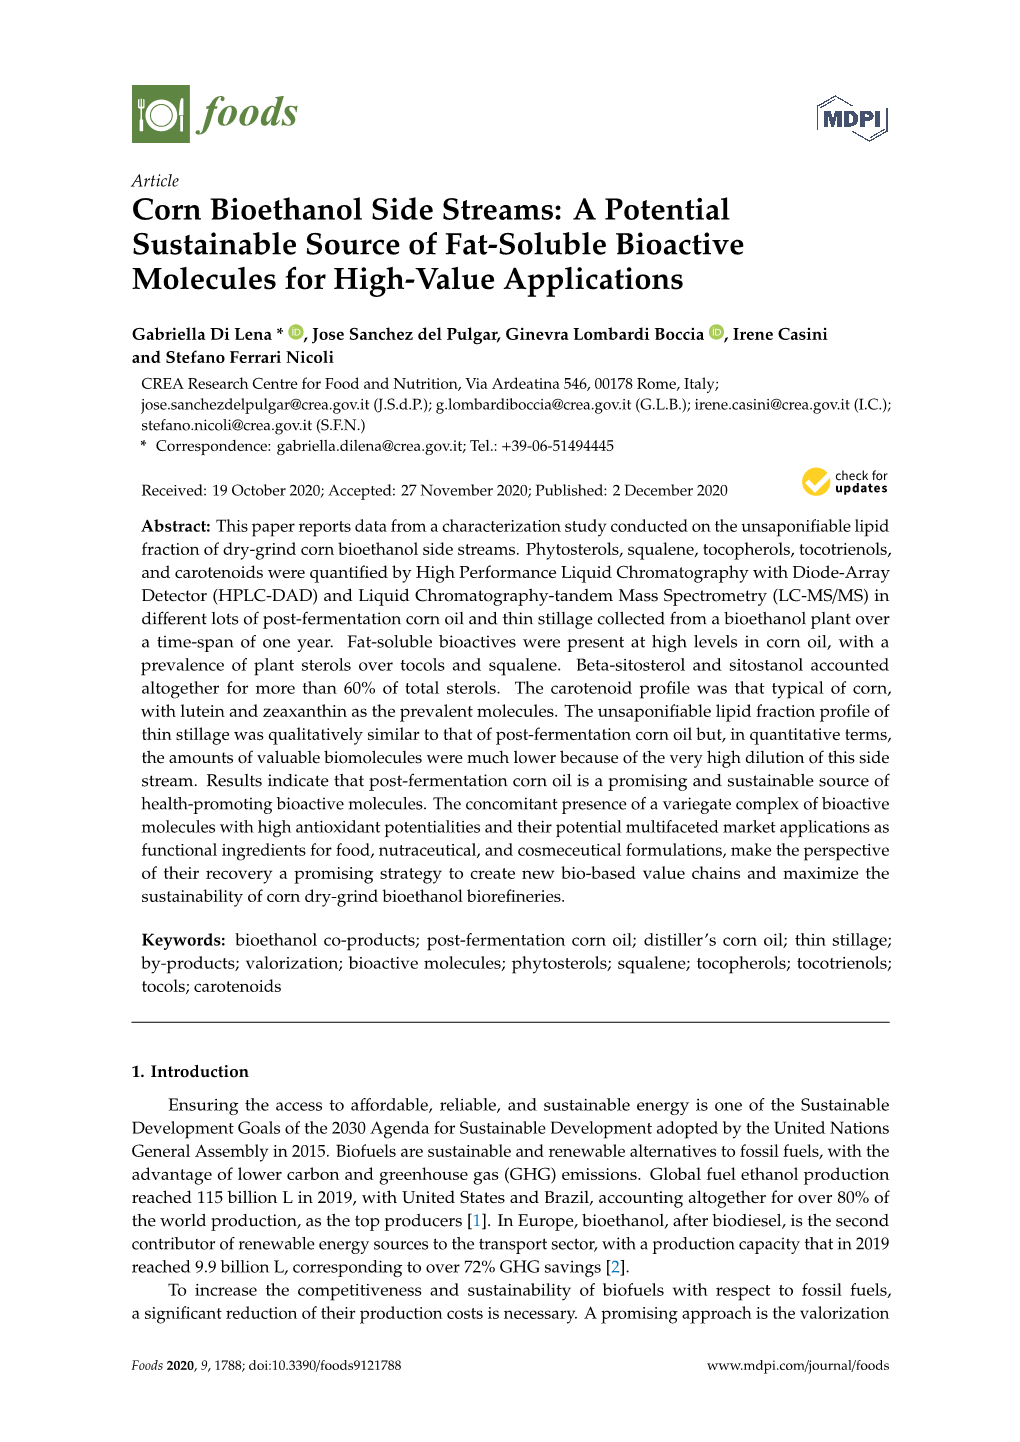 Corn Bioethanol Side Streams: a Potential Sustainable Source of Fat-Soluble Bioactive Molecules for High-Value Applications